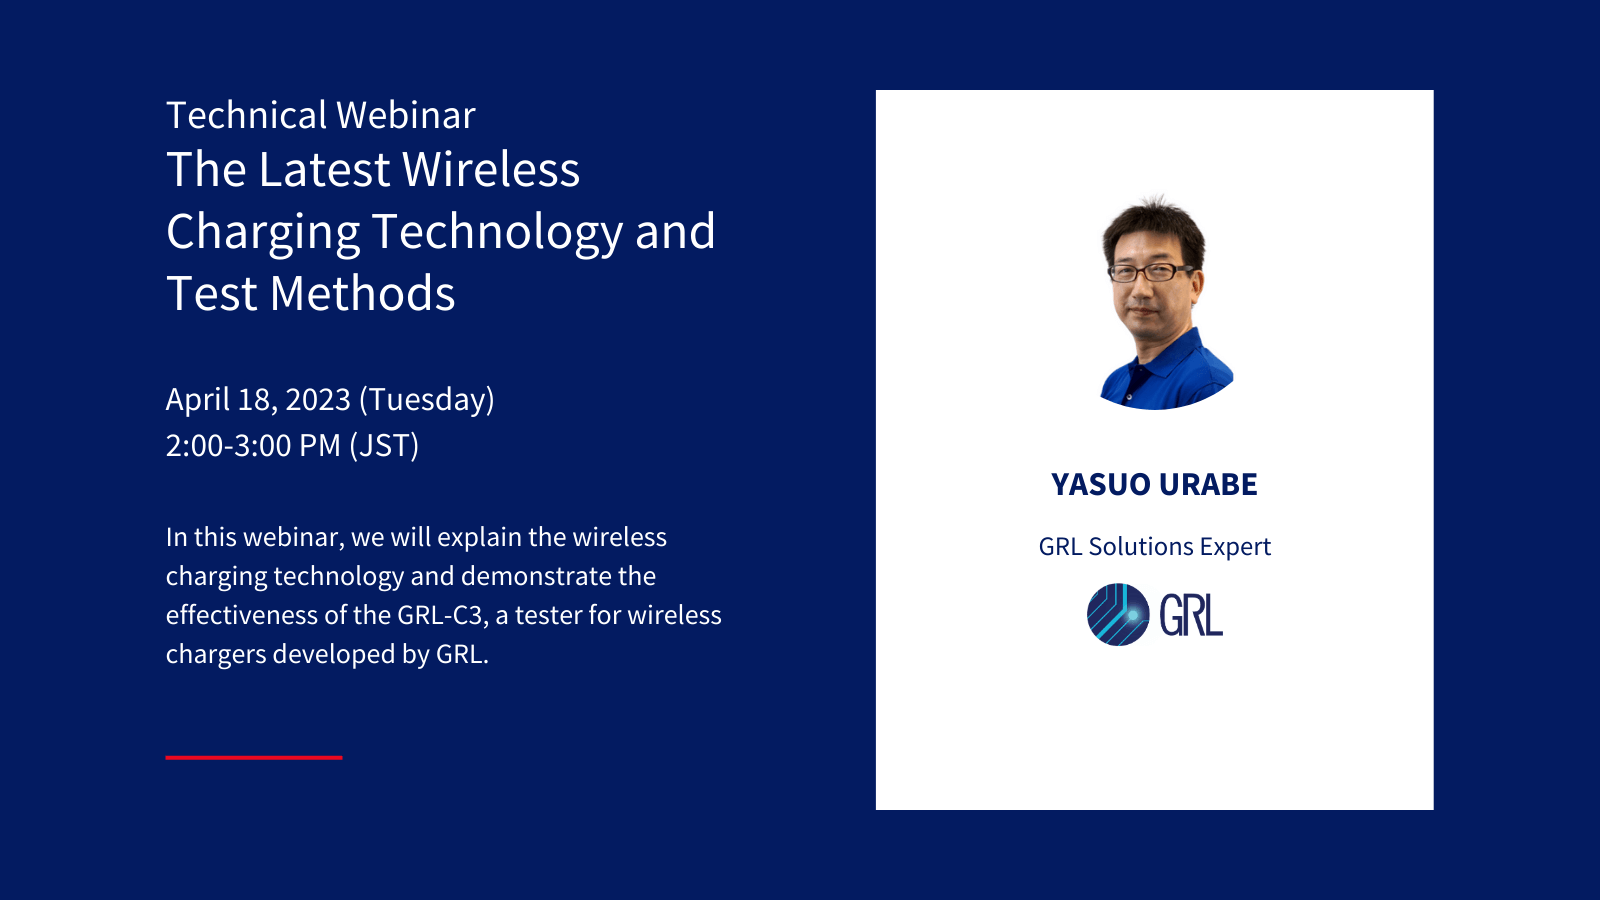 The Latest Wireless Charging Technology and Test Methods - Technical Webinar